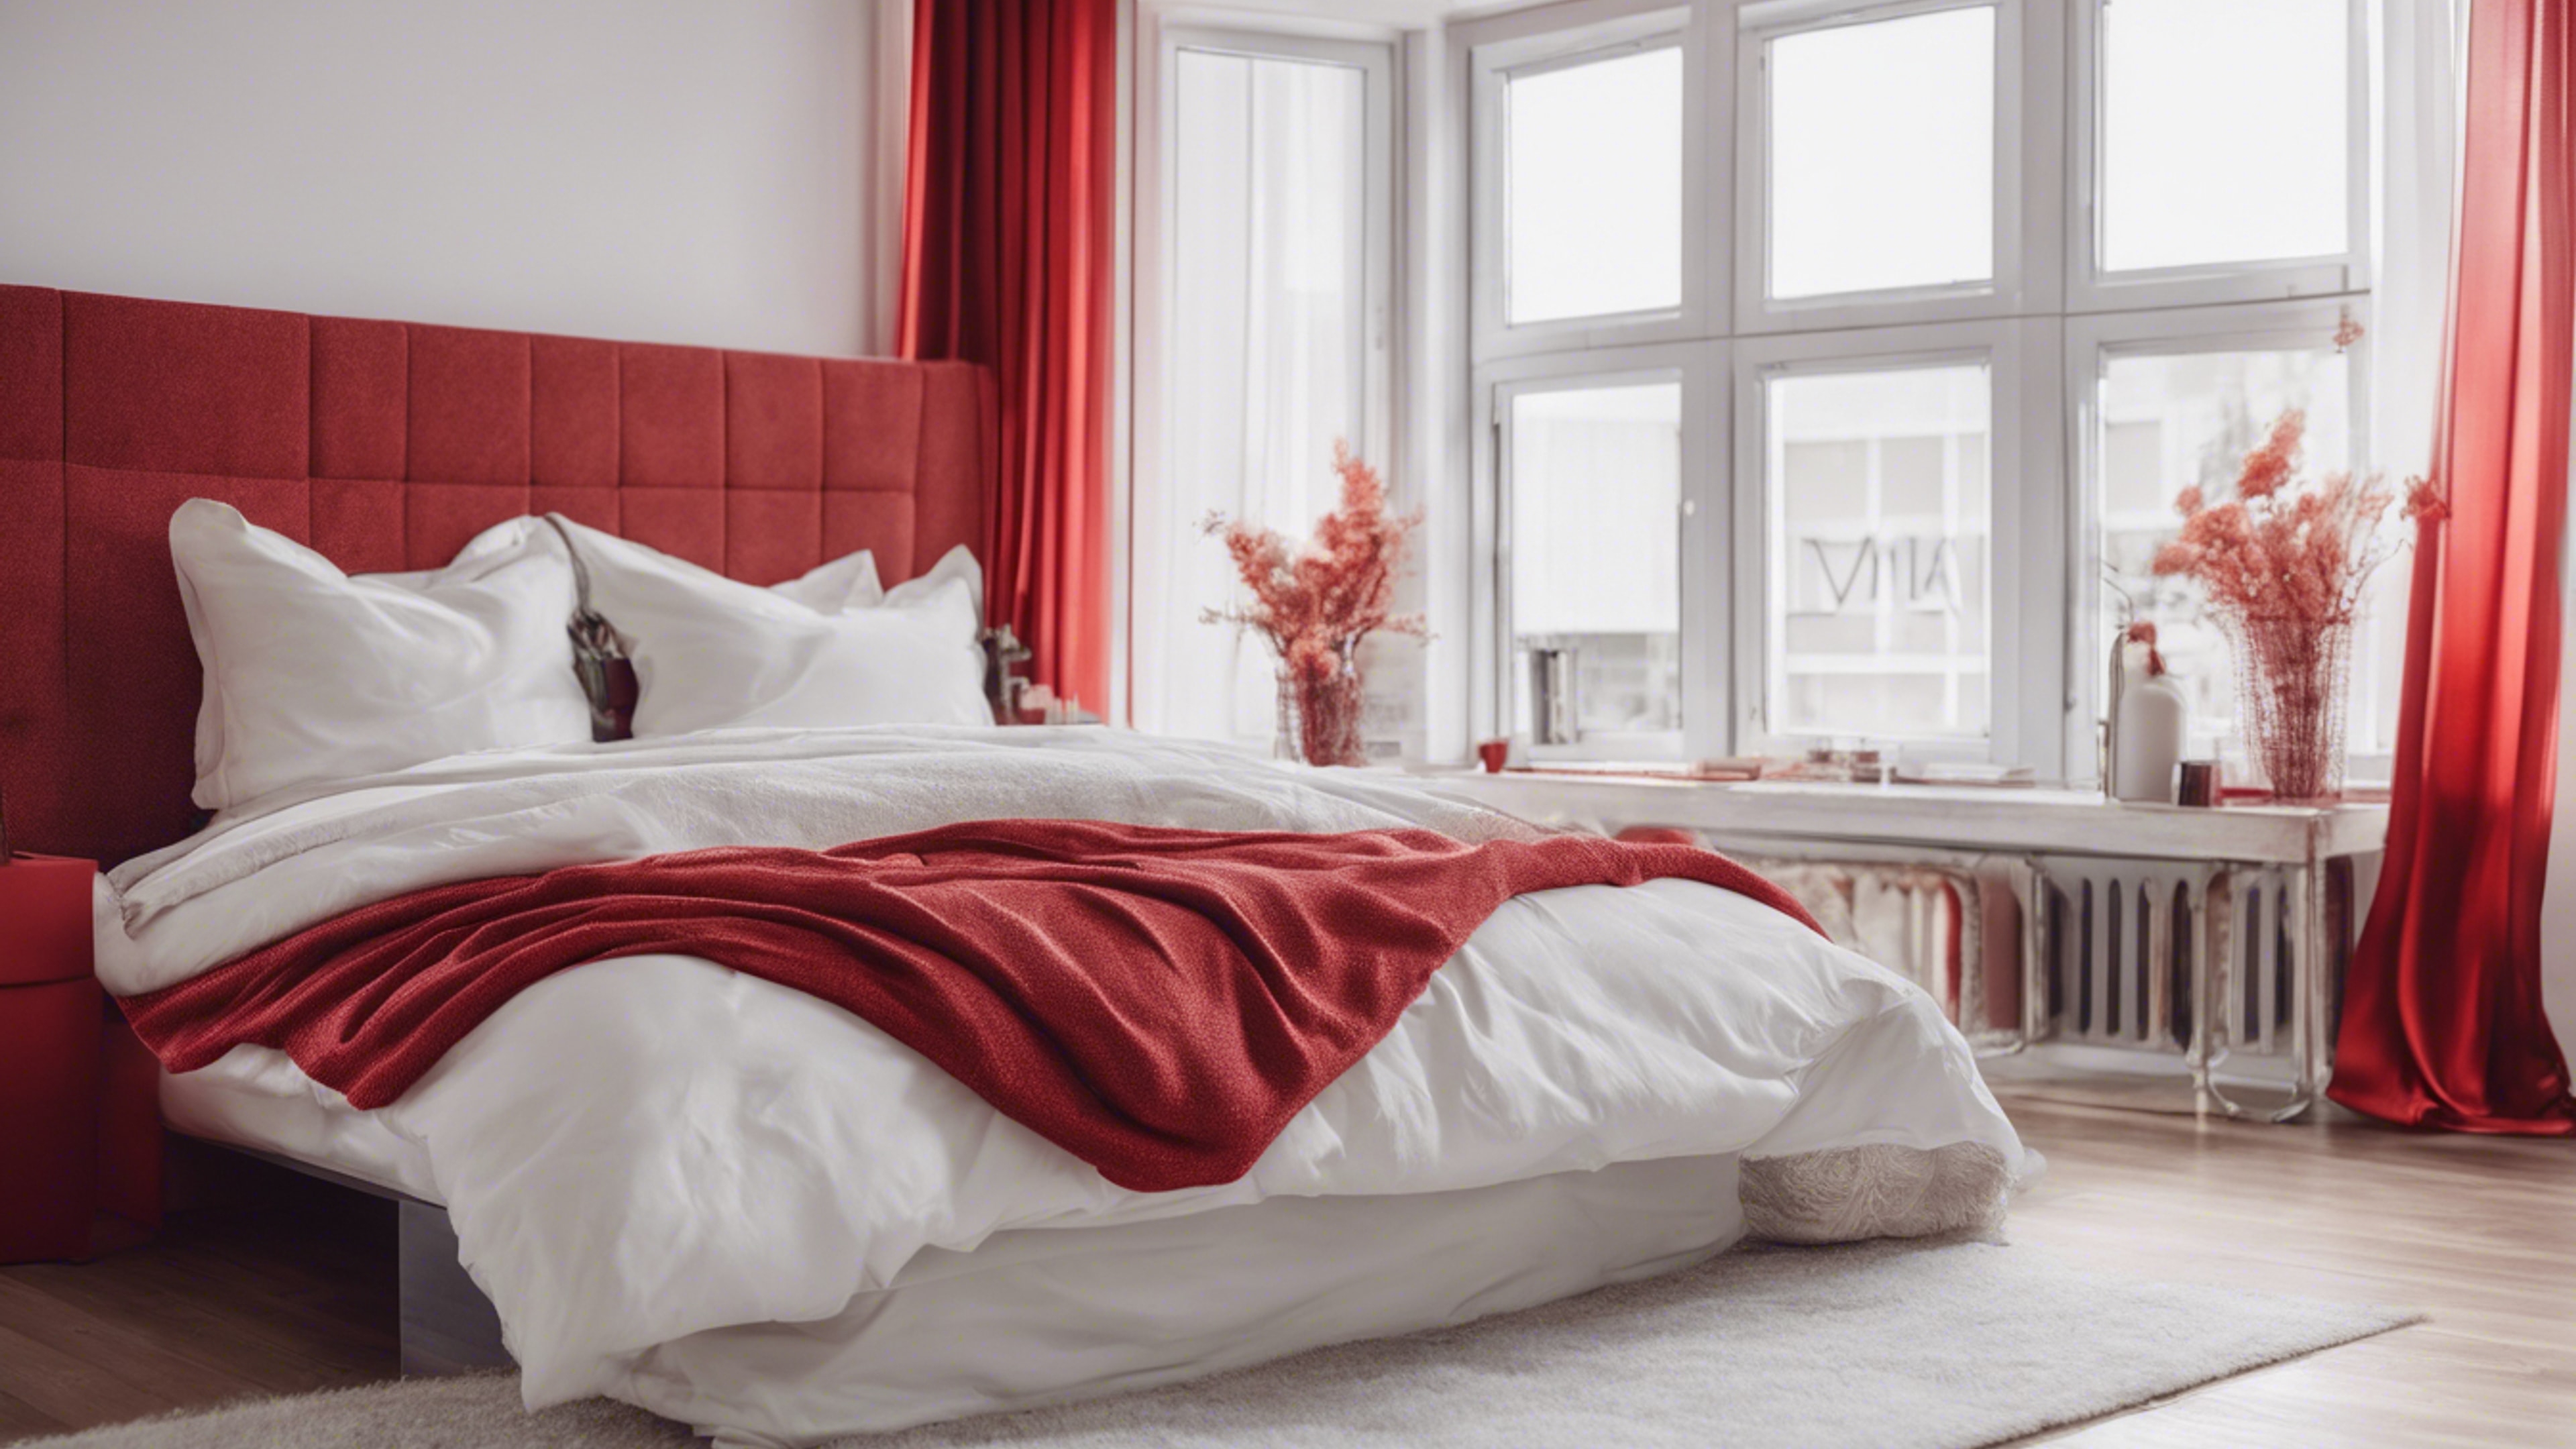 A contemporary bedroom decorated in minimalist red and white theme. Papel de parede[ba3f34033fa9429b9d31]